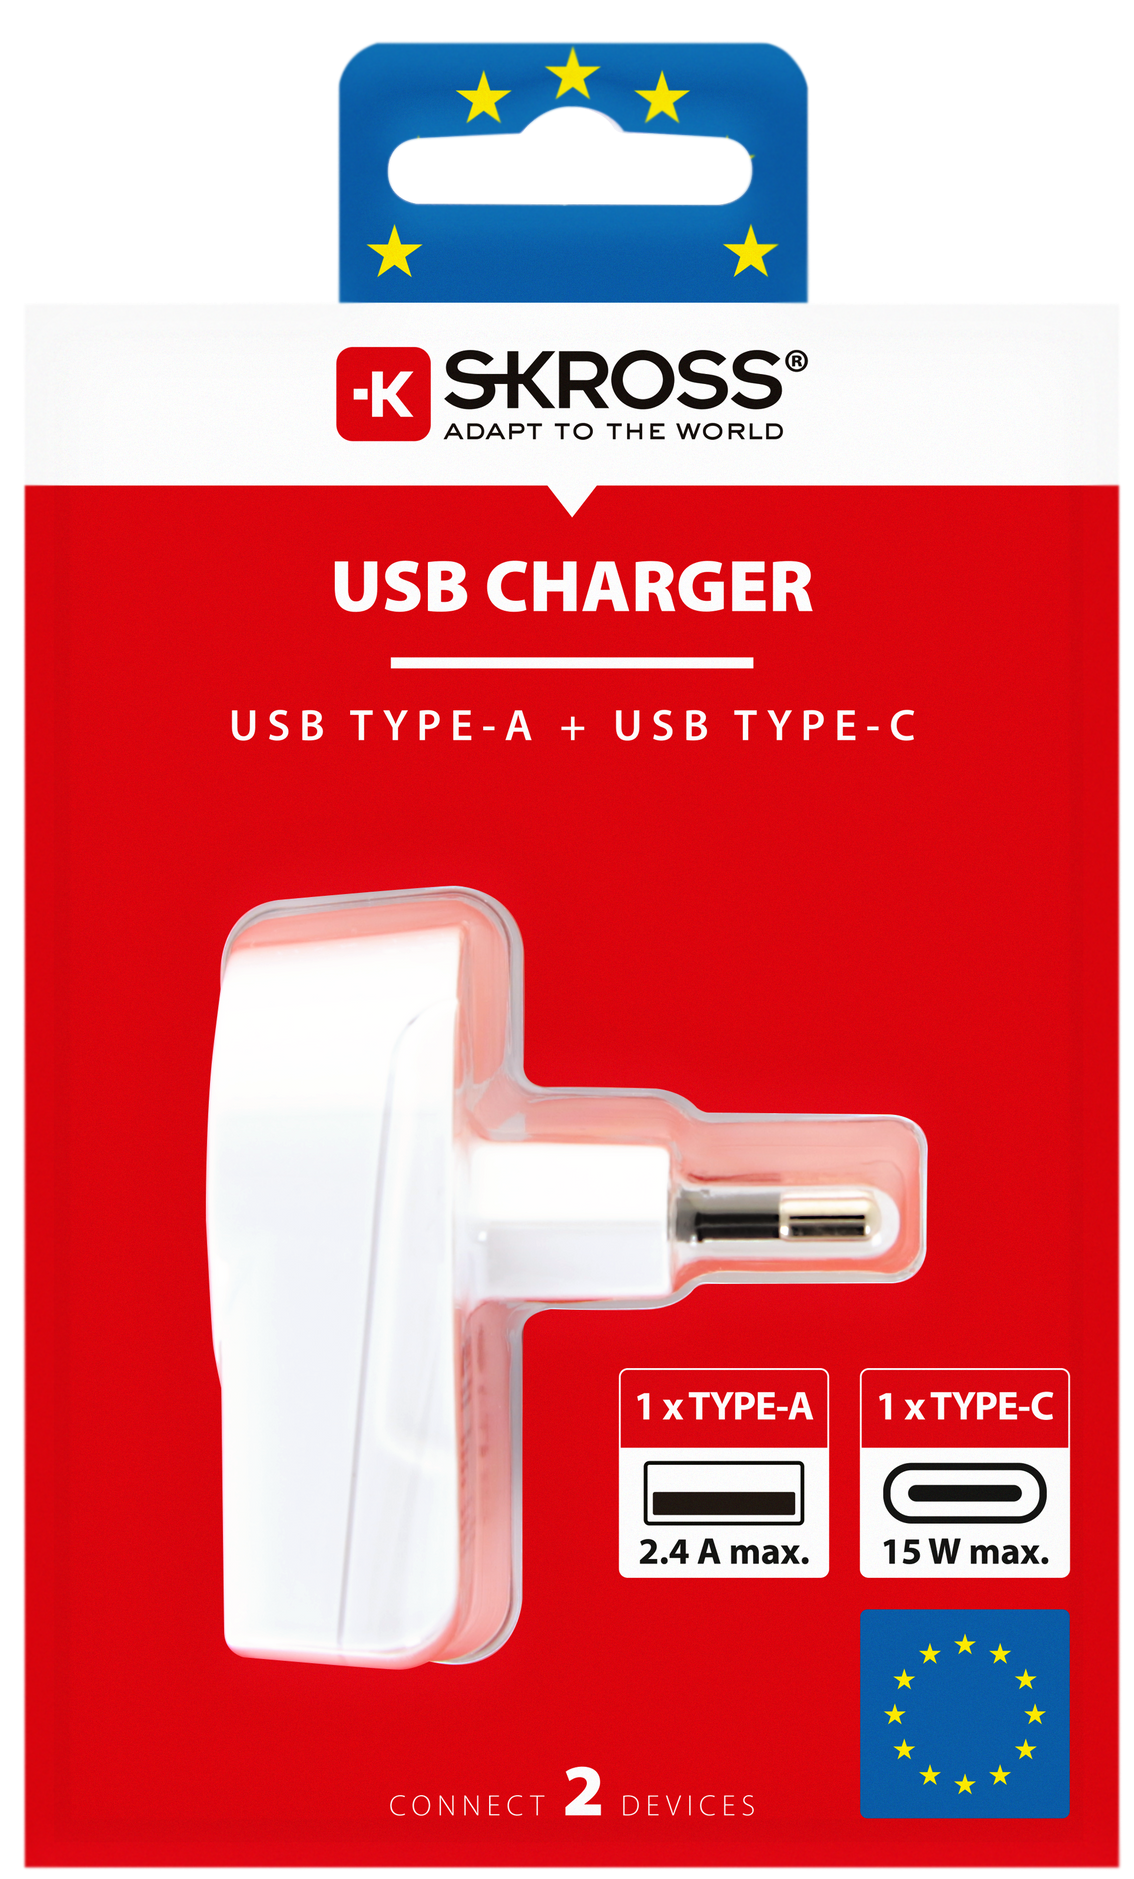 Skross USB Charger. Euro USB Charger (AC) Packaging